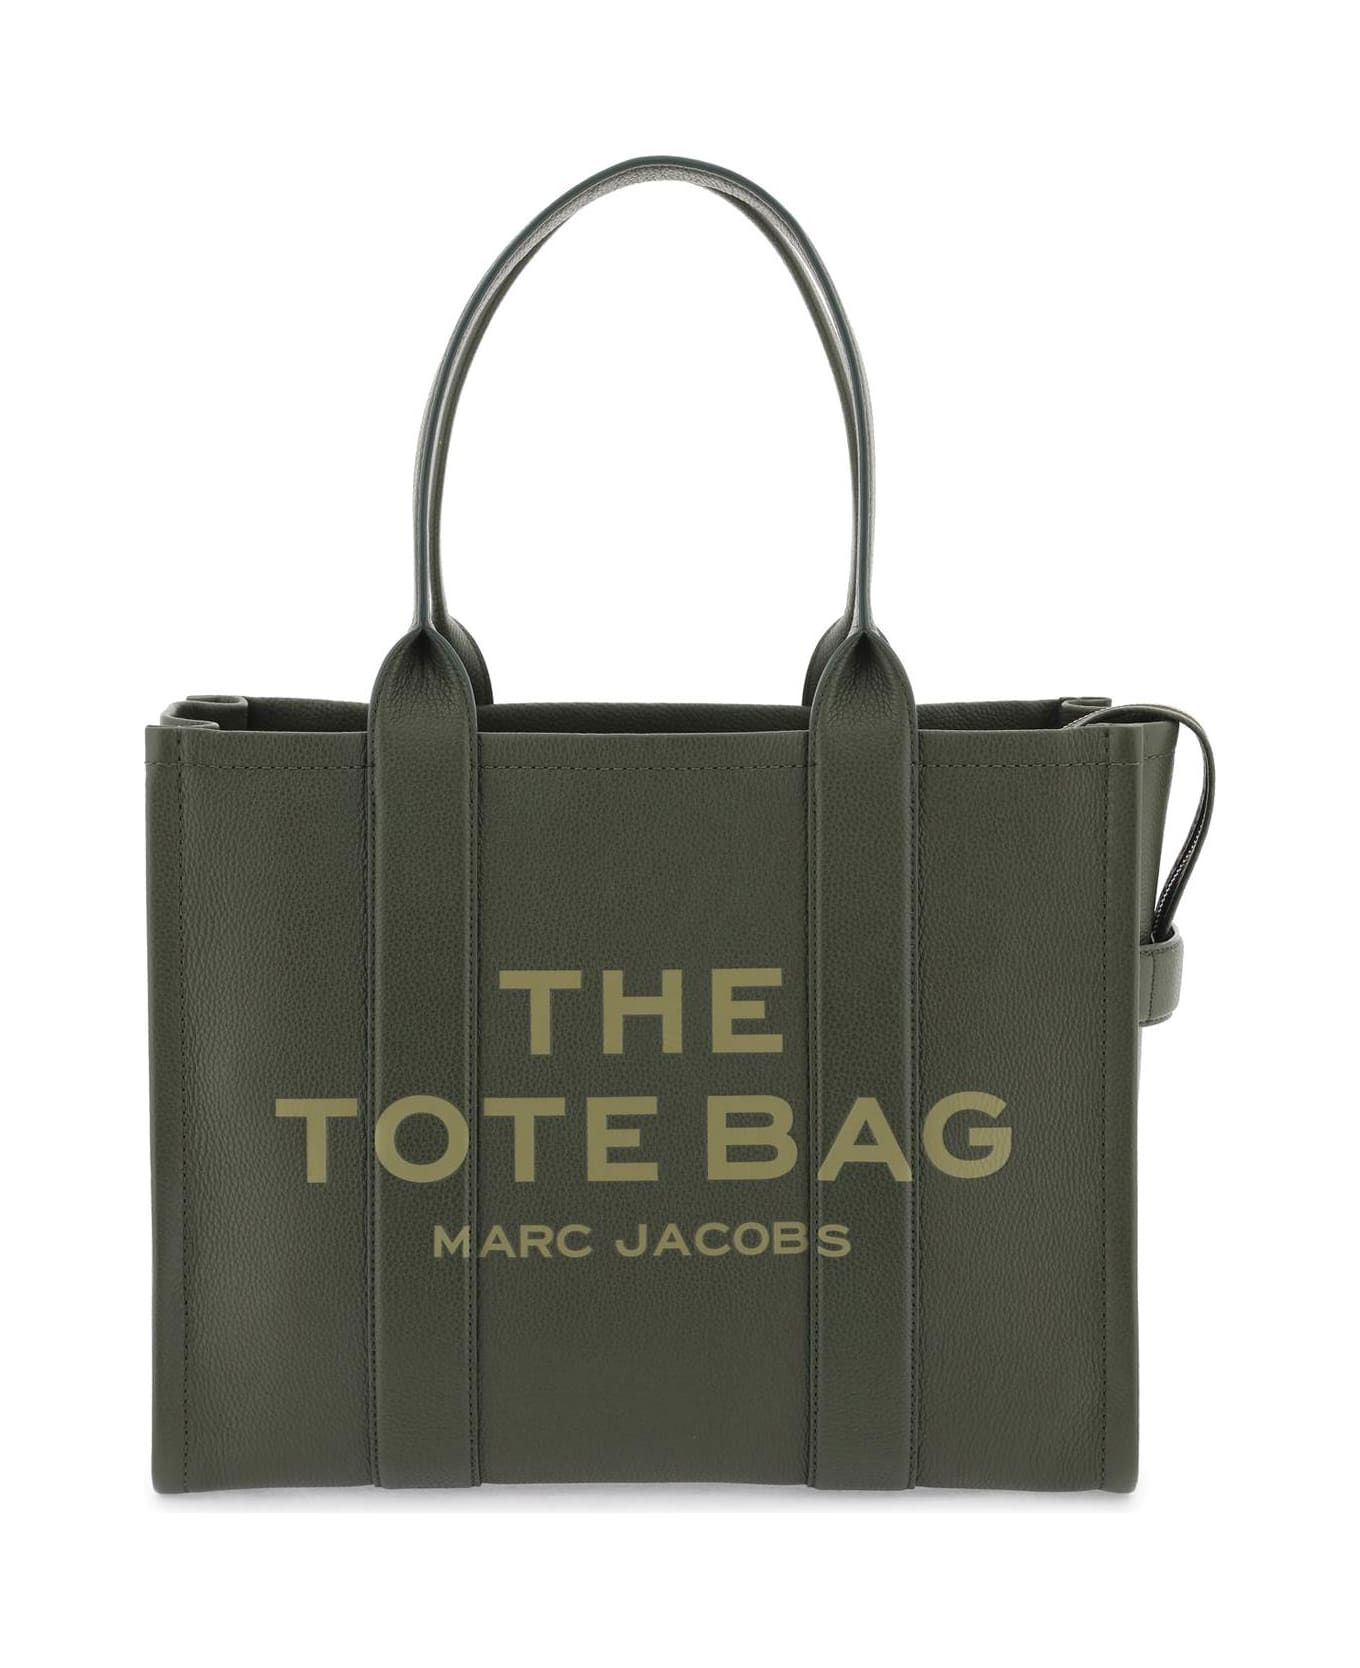 Marc Jacobs The Leather Large Tote Bag - FOREST (Green)